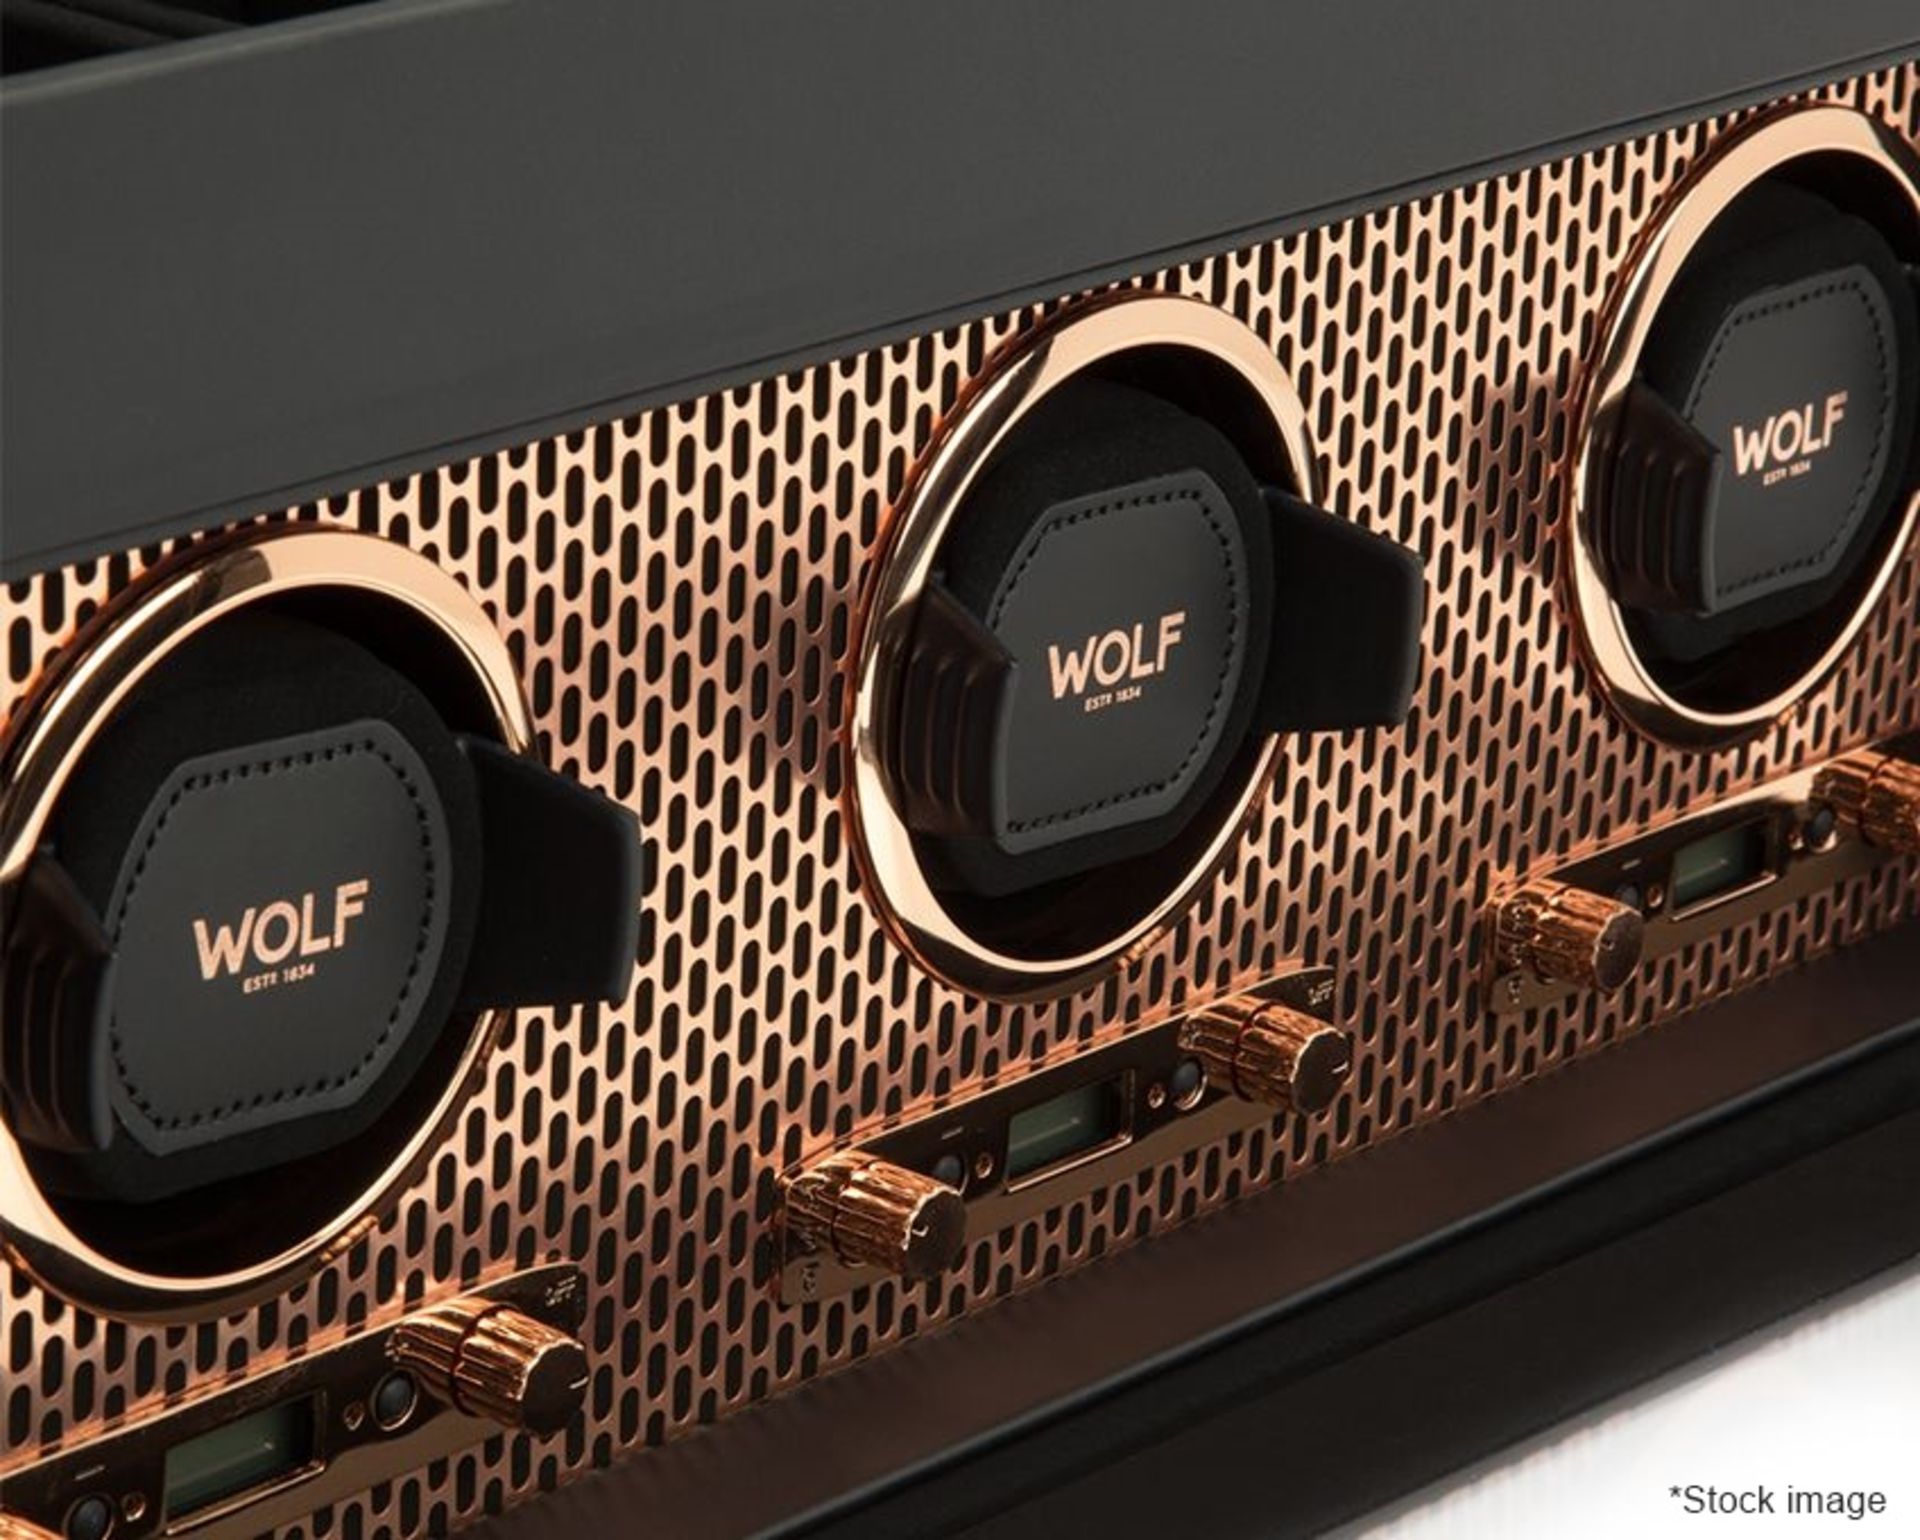 1 x WOLF 'Axis' Luxury Triple Watch Winder With Storage - Original Price £1,809 - Unused Boxed Stock - Image 8 of 32